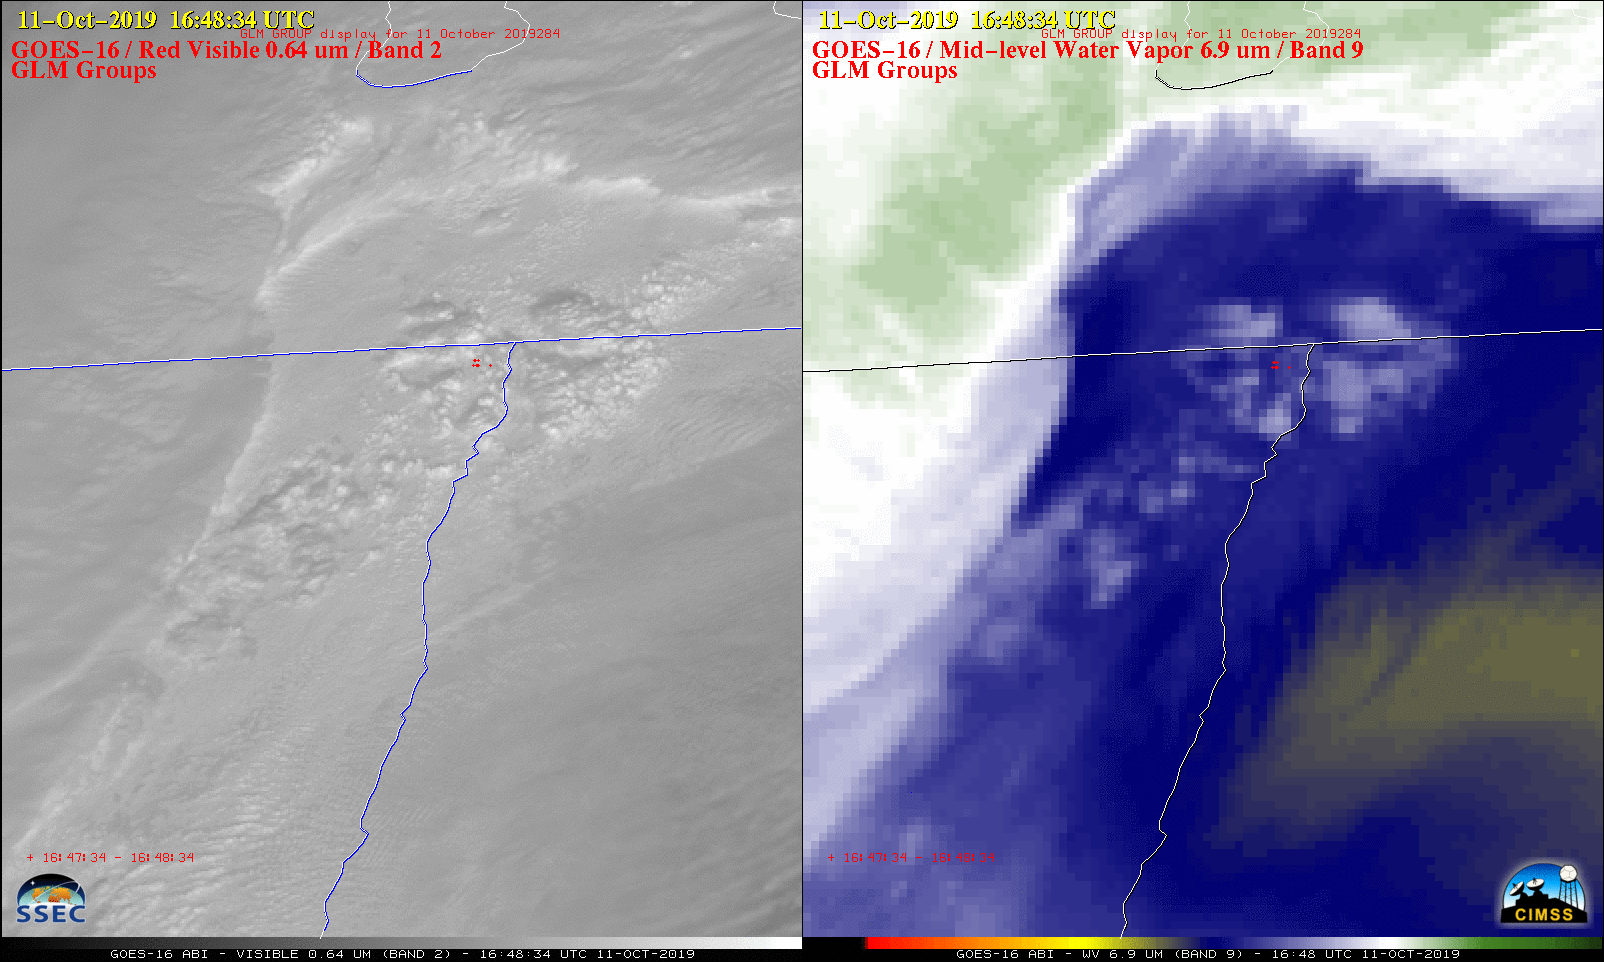 GOES-16 "Red" Visible (0.64 µm, left) and Mid-level Water Vapor (6.9 µm, right) images, with GLM Groups plotted in red [click to play animation | MP4]